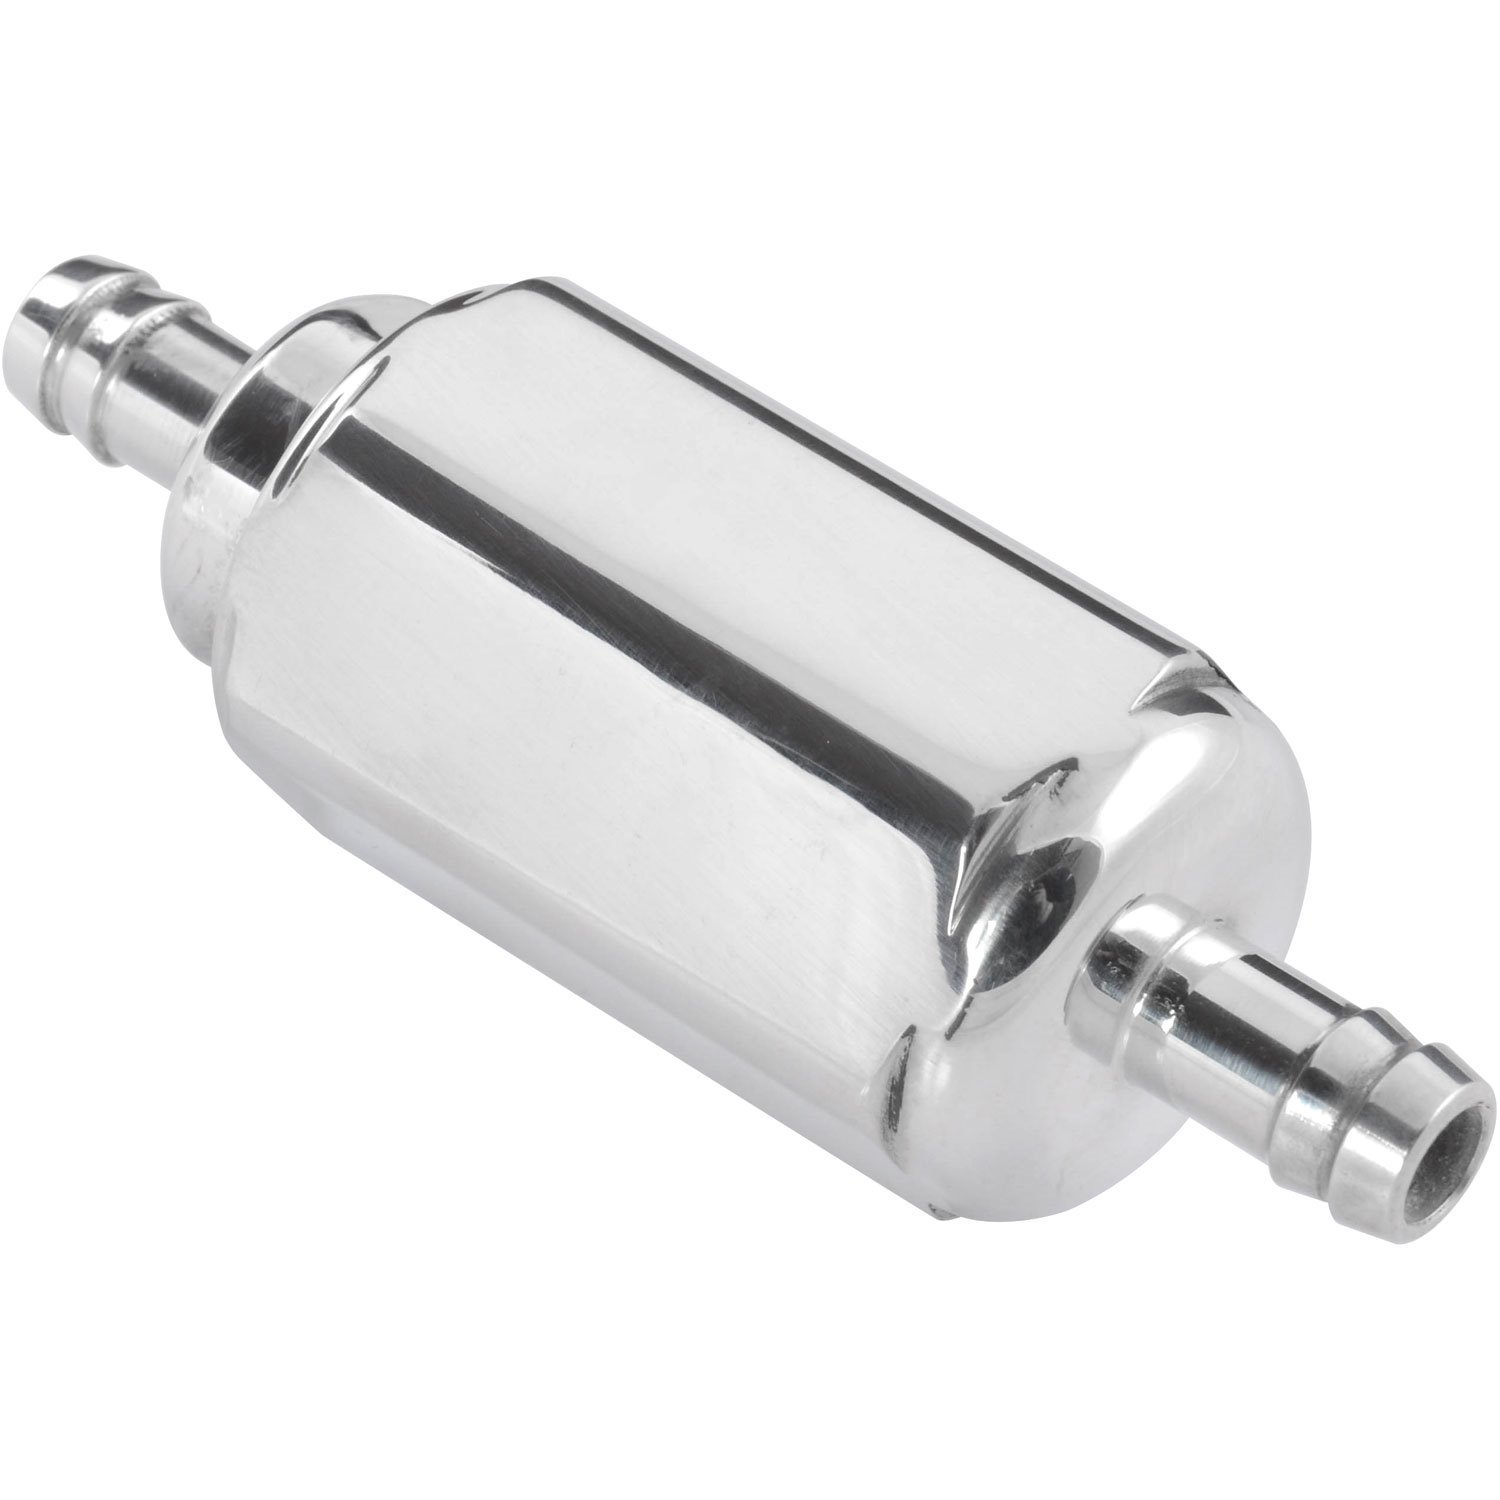 Compact Billet Aluminum In-Line Fuel Filter, 2 5/16 in. Long [3/8 in. Male/Male Hose Barb, Polished]